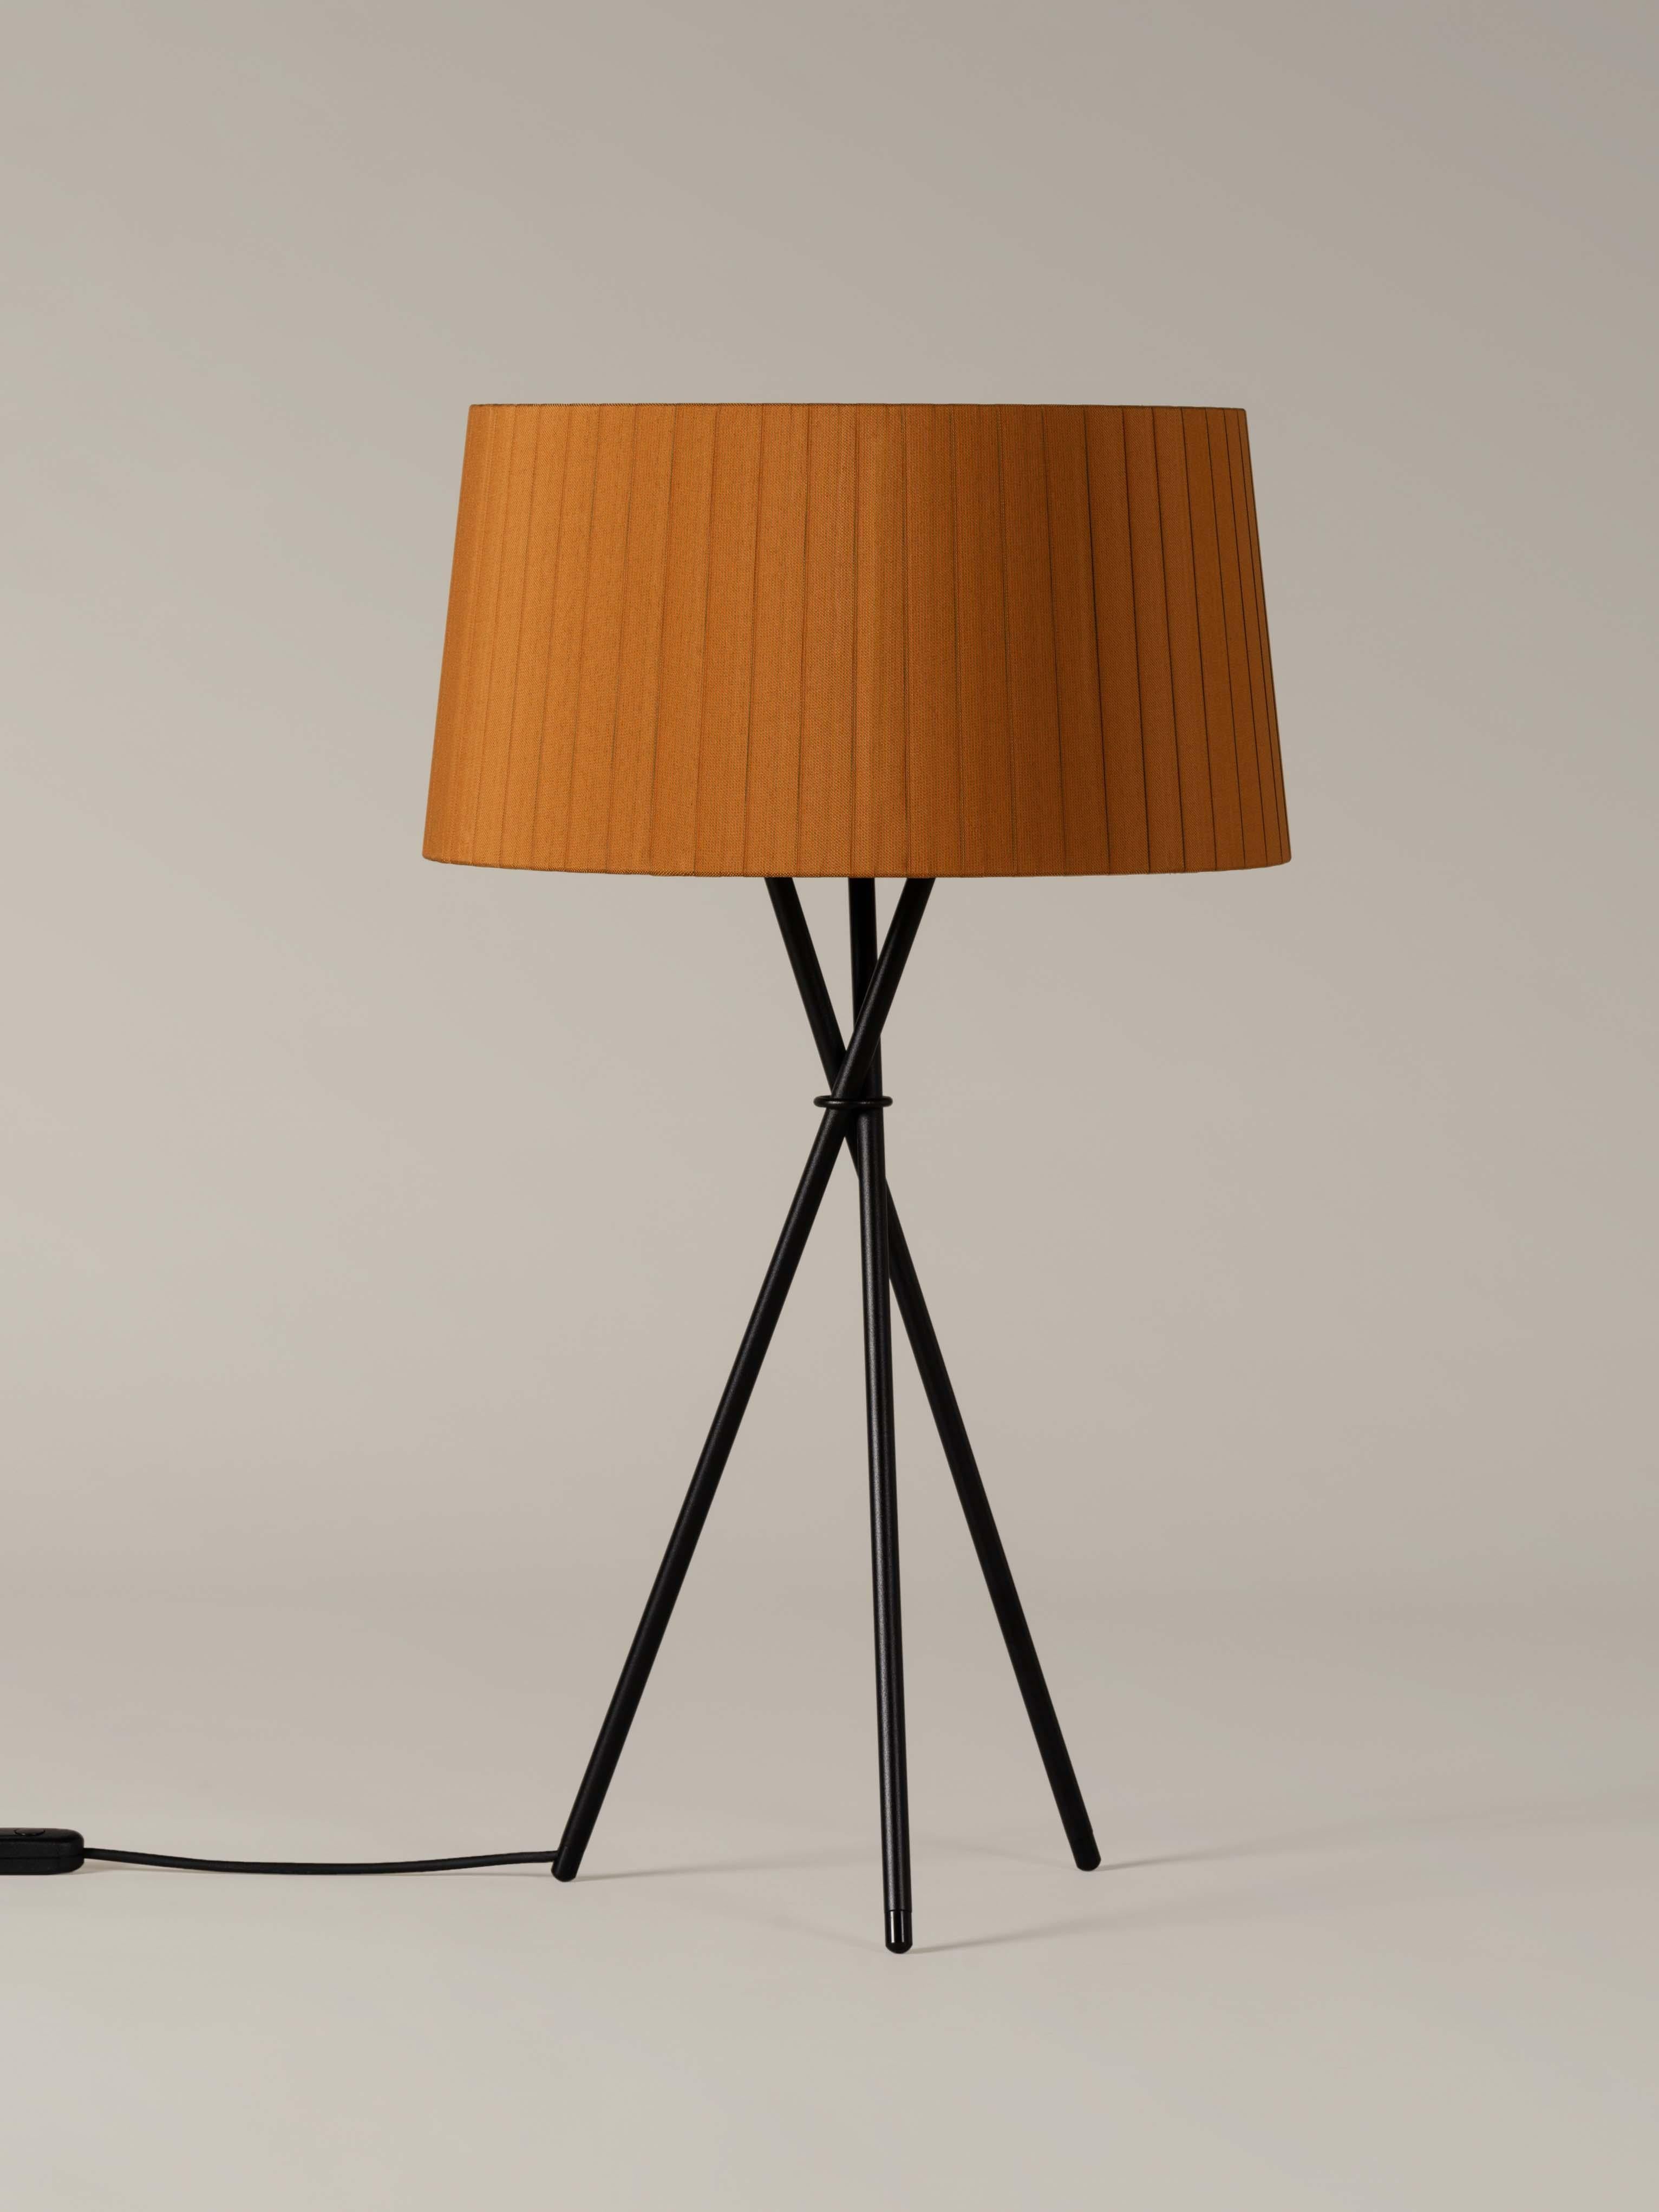 Mustard trípode G6 table lamp by Santa & Cole
Dimensions: D 45 x H 75 cm
Materials: Metal, ribbon.
Available in other colors.

Trípode humanises neutral spaces with its colourful and functional sobriety. The shade is hand ribboned and its base